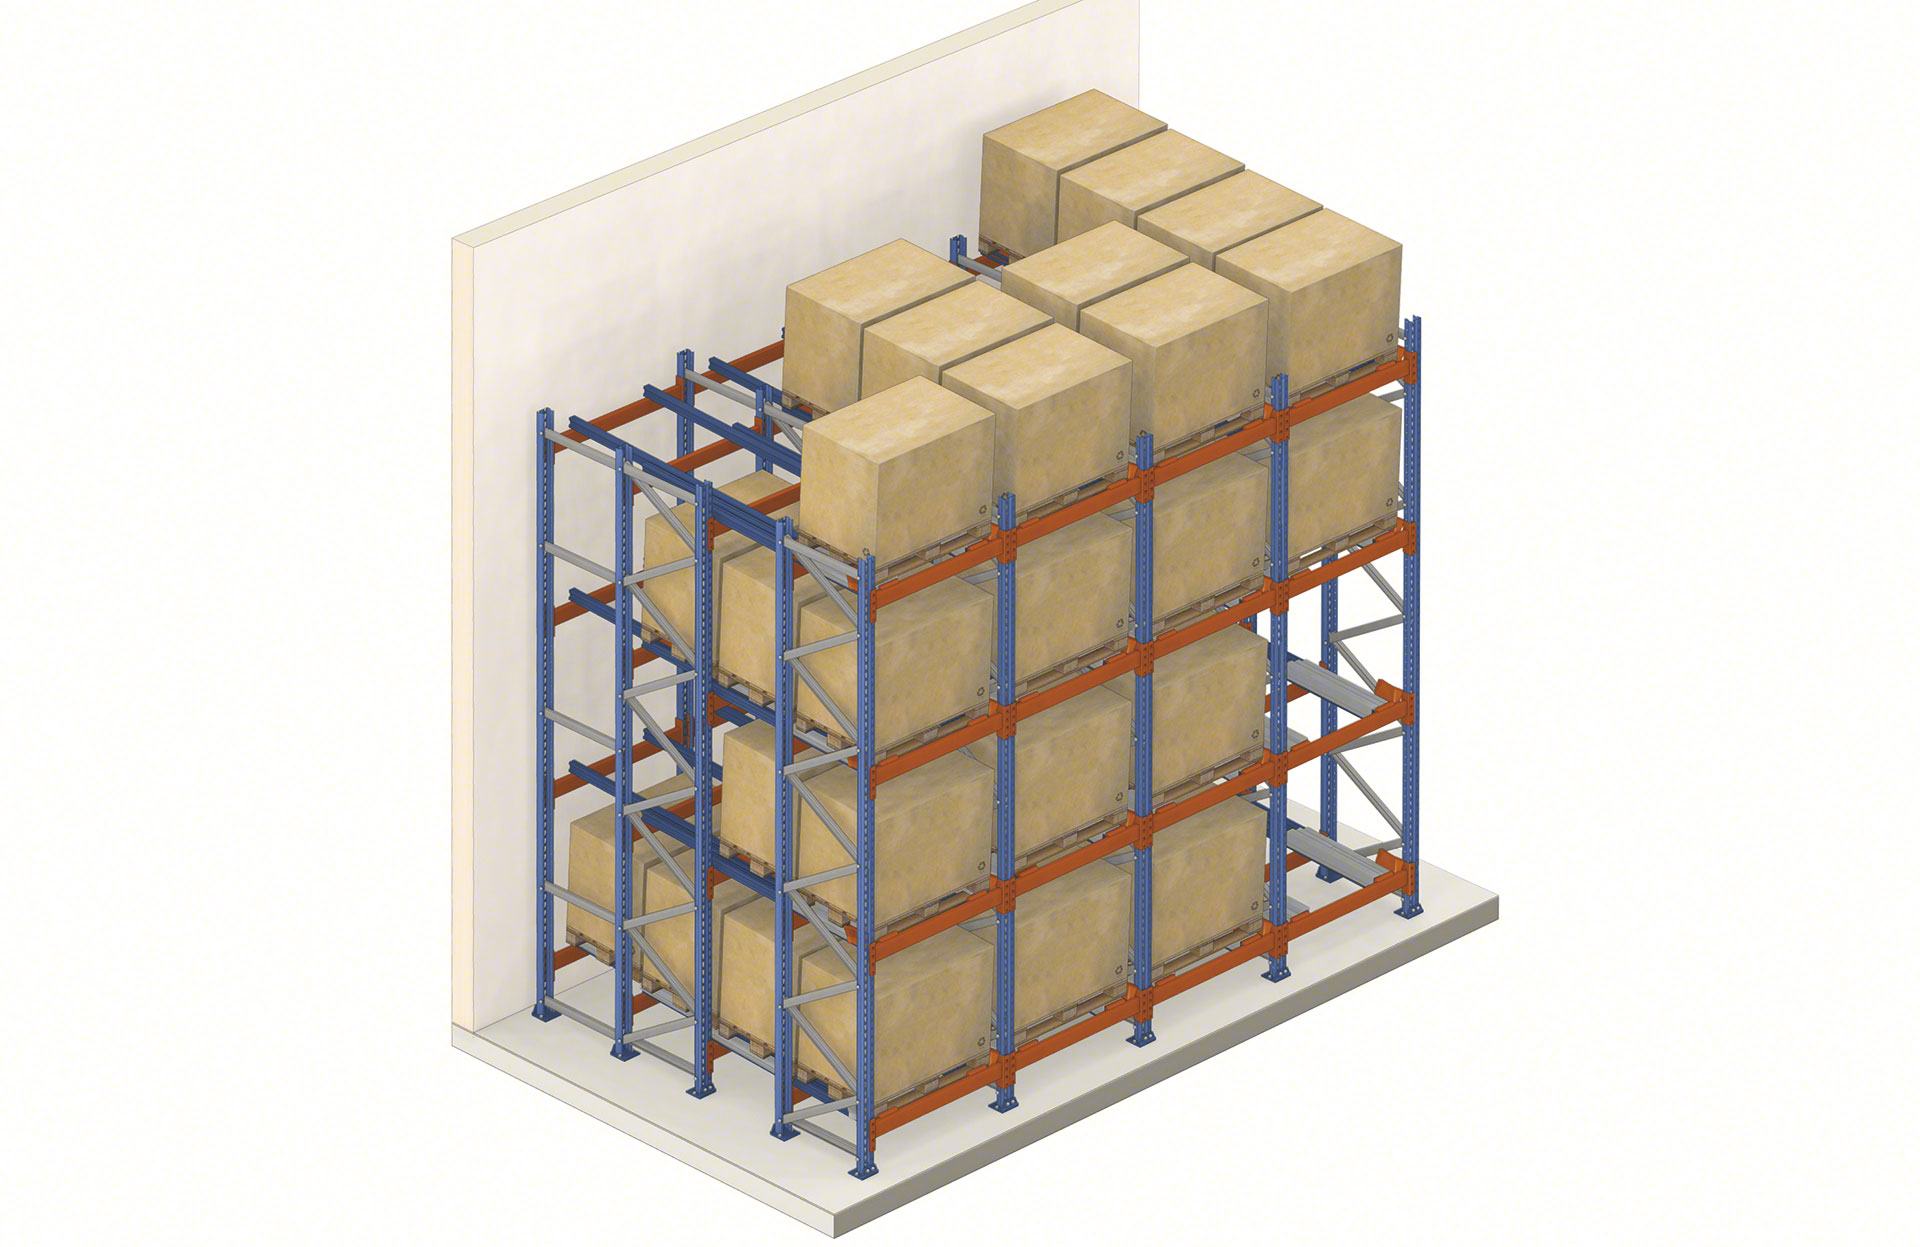 Push-back pallet racking is a high-density storage system offering access to goods from a single aisle